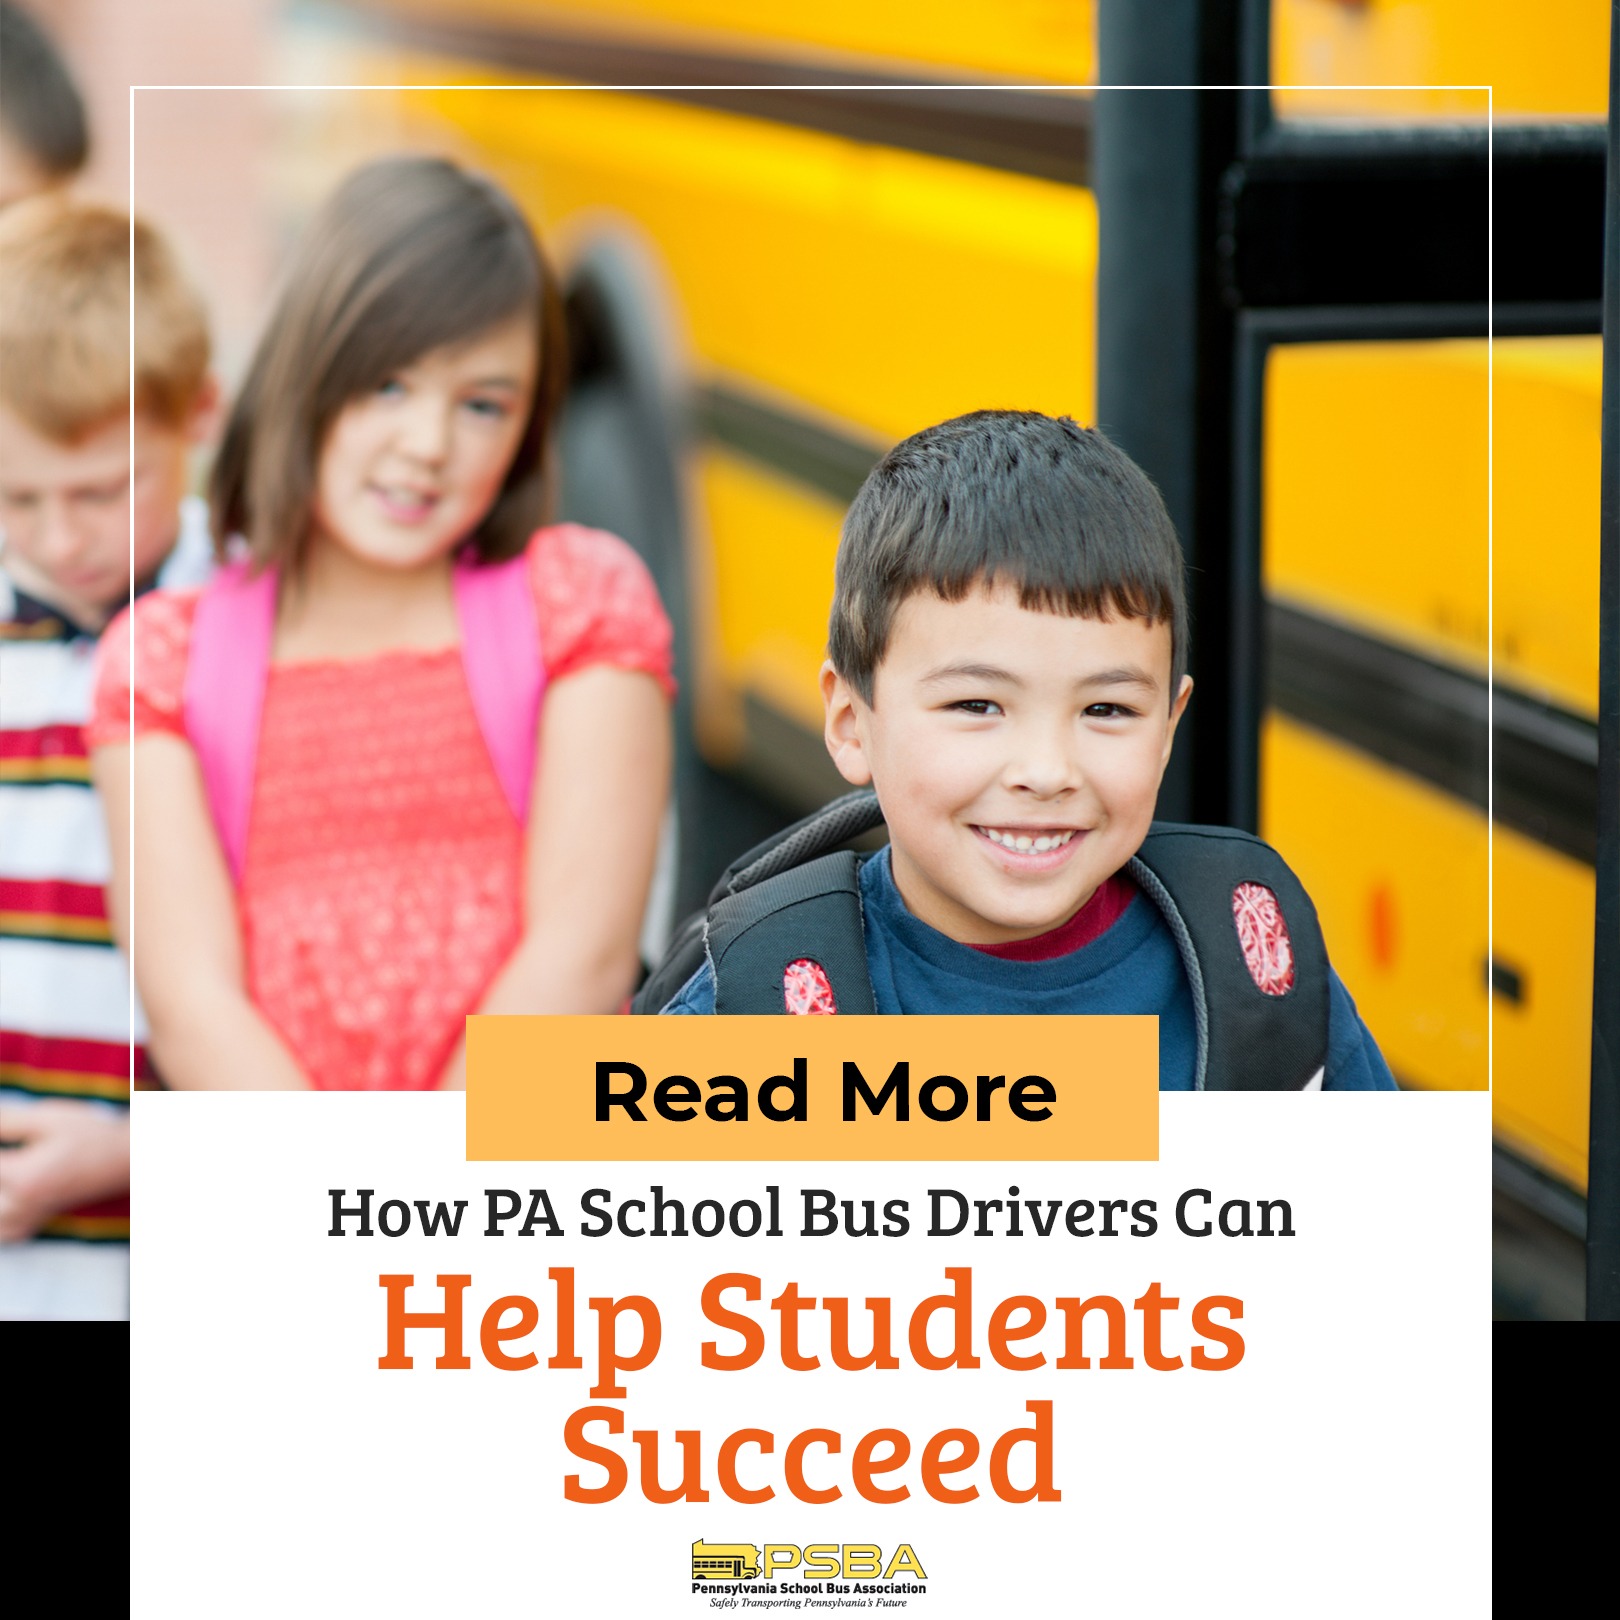 How PA School Bus Drivers Can Help Students Succeed